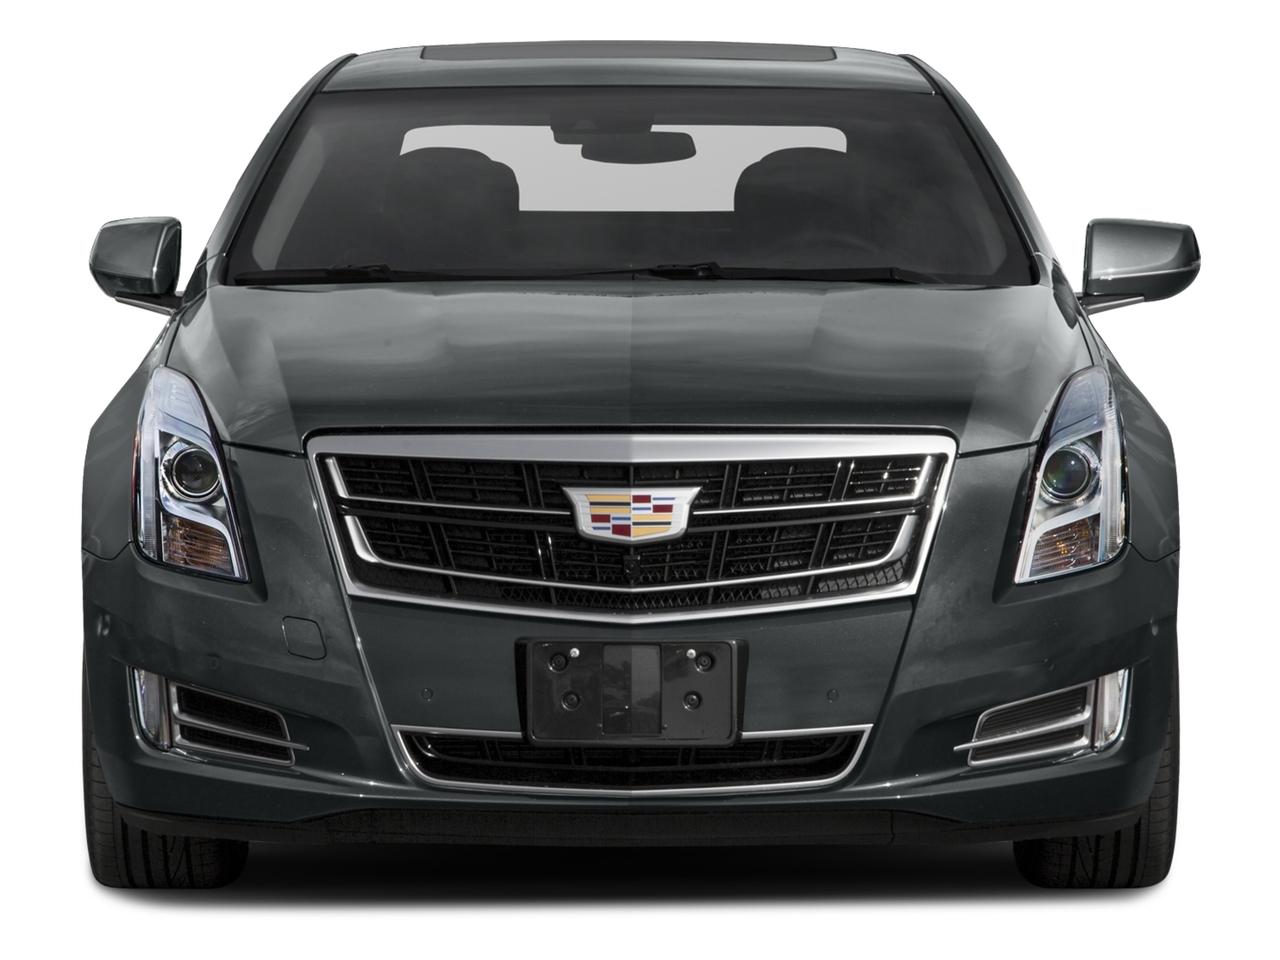 Certified 2016 Cadillac XTS For Sale Raleigh NC| U17644A